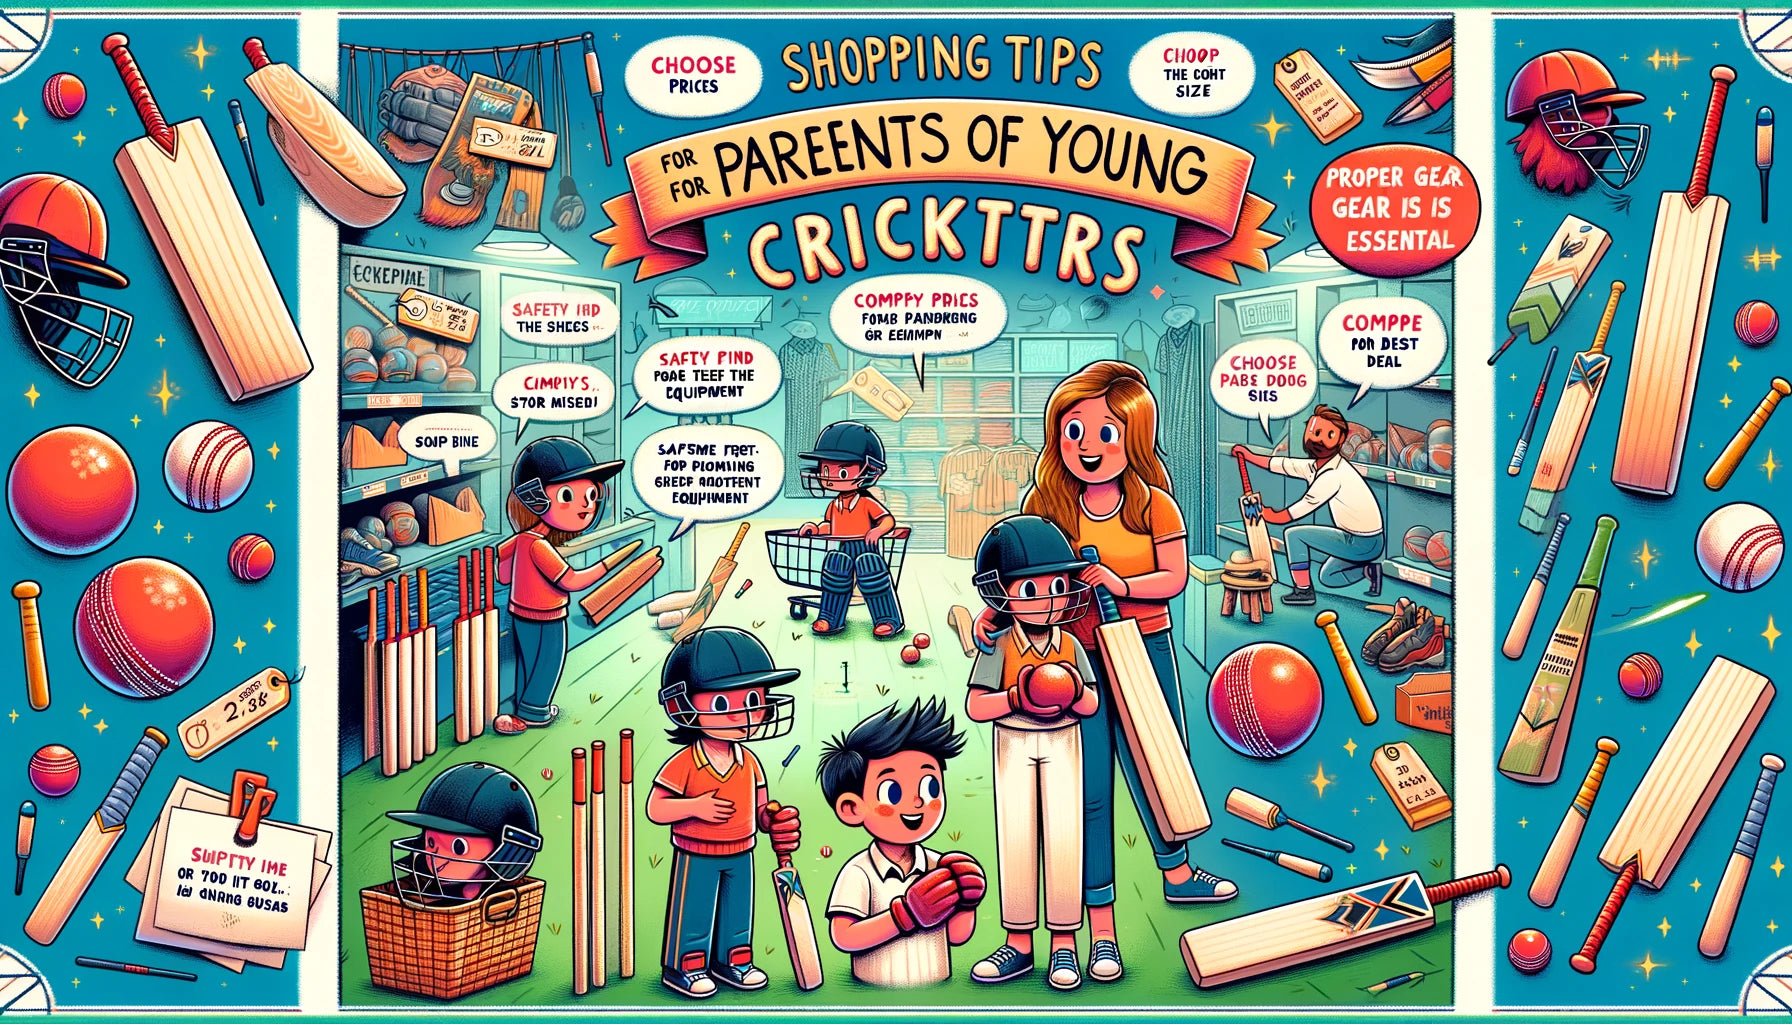 Cricket Online Store: Shopping Tips for Parents of Young Cricketers